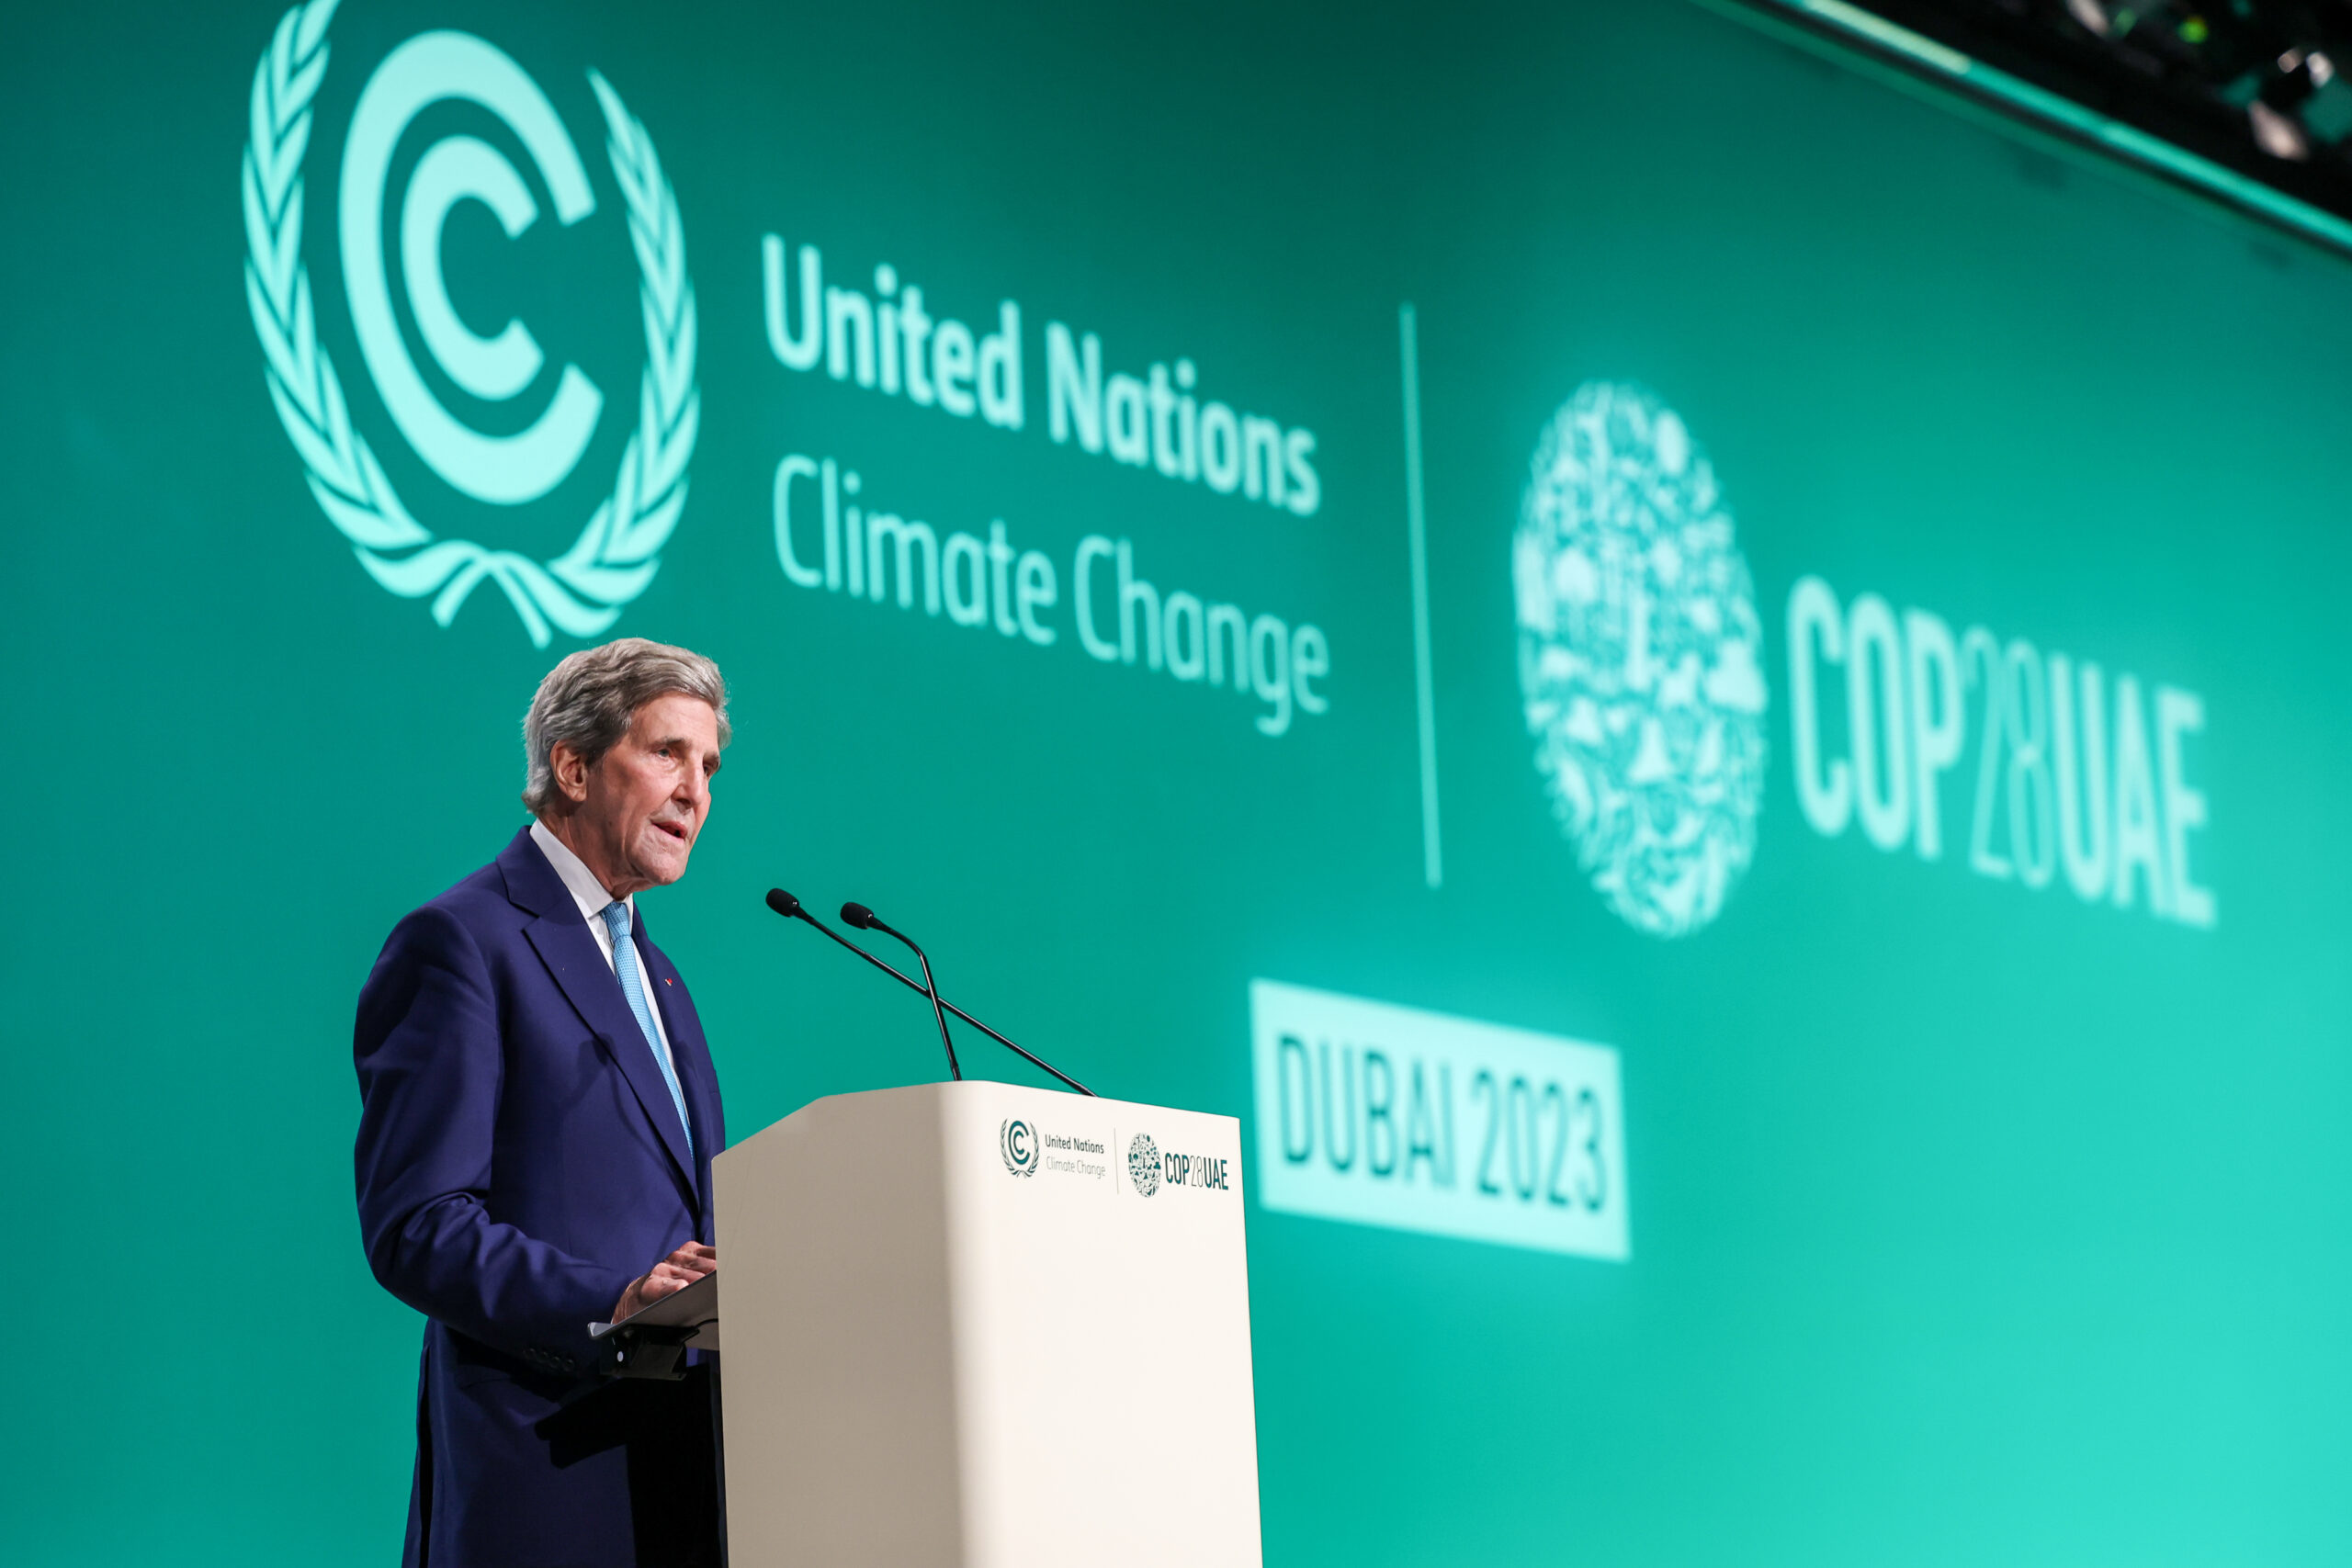 John Kerry, U.S. Special Presidential Envoy for Climate, speaks onstage at the COP28 Climate Conference in Dubai on Dec. 4. Credit: Mahmoud Khaled /COP28 via Getty Images